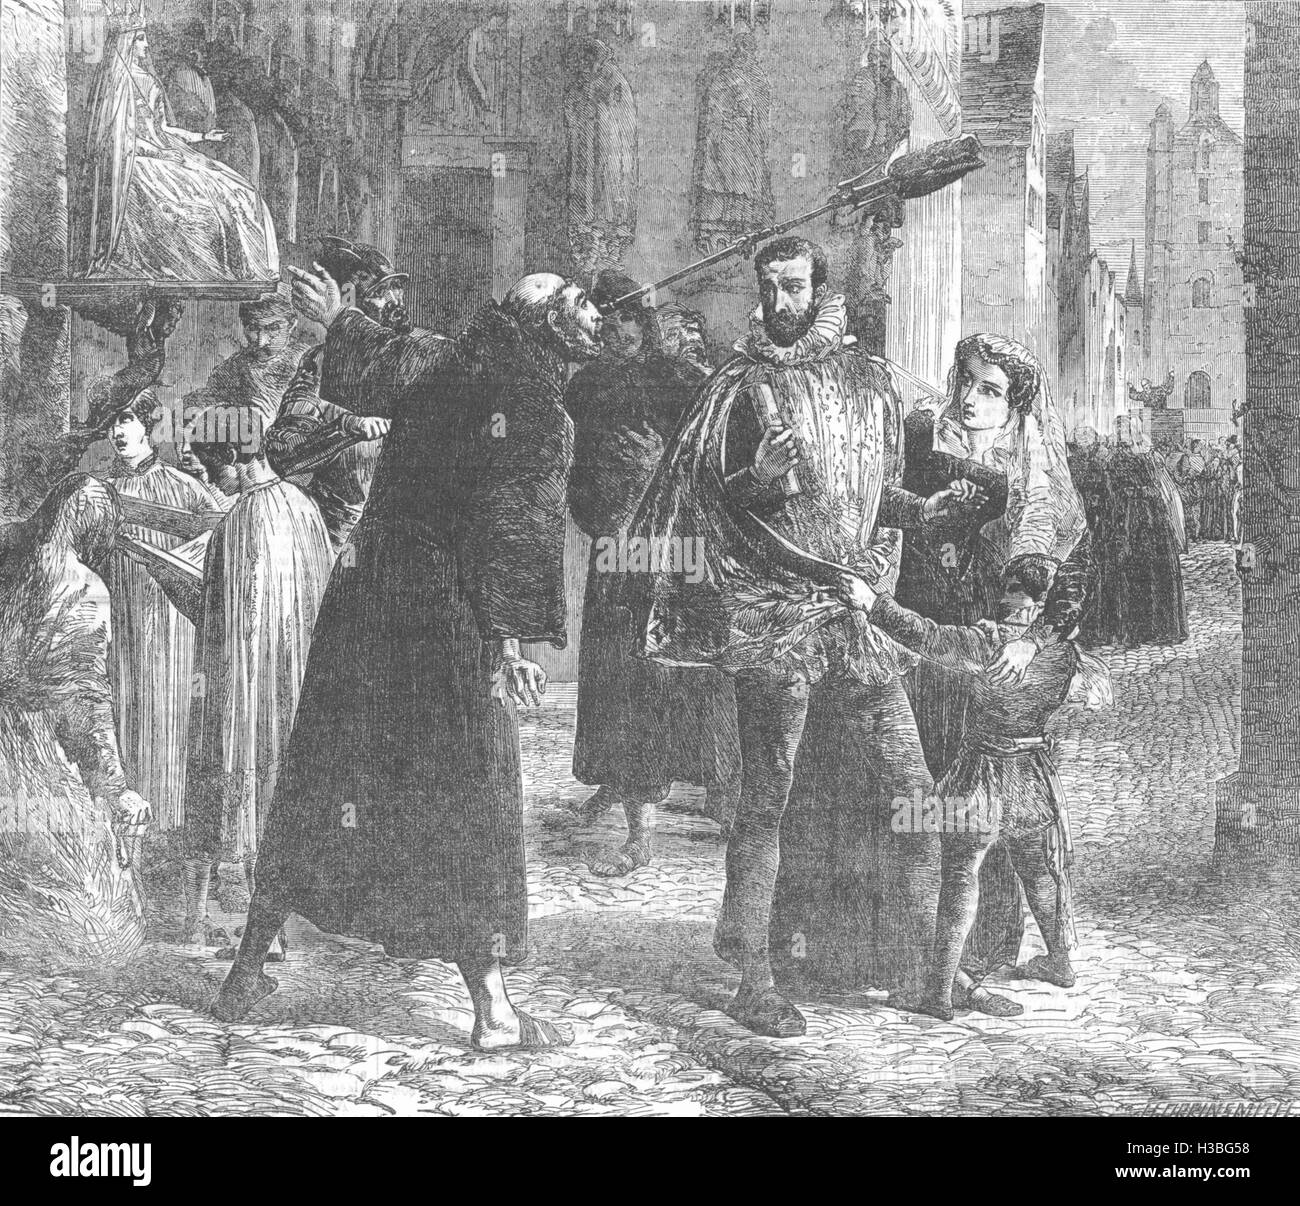 PARIS Time of the Persecution of the Christian Reformers in Paris, in 1559 1854. The Illustrated London News Stock Photo